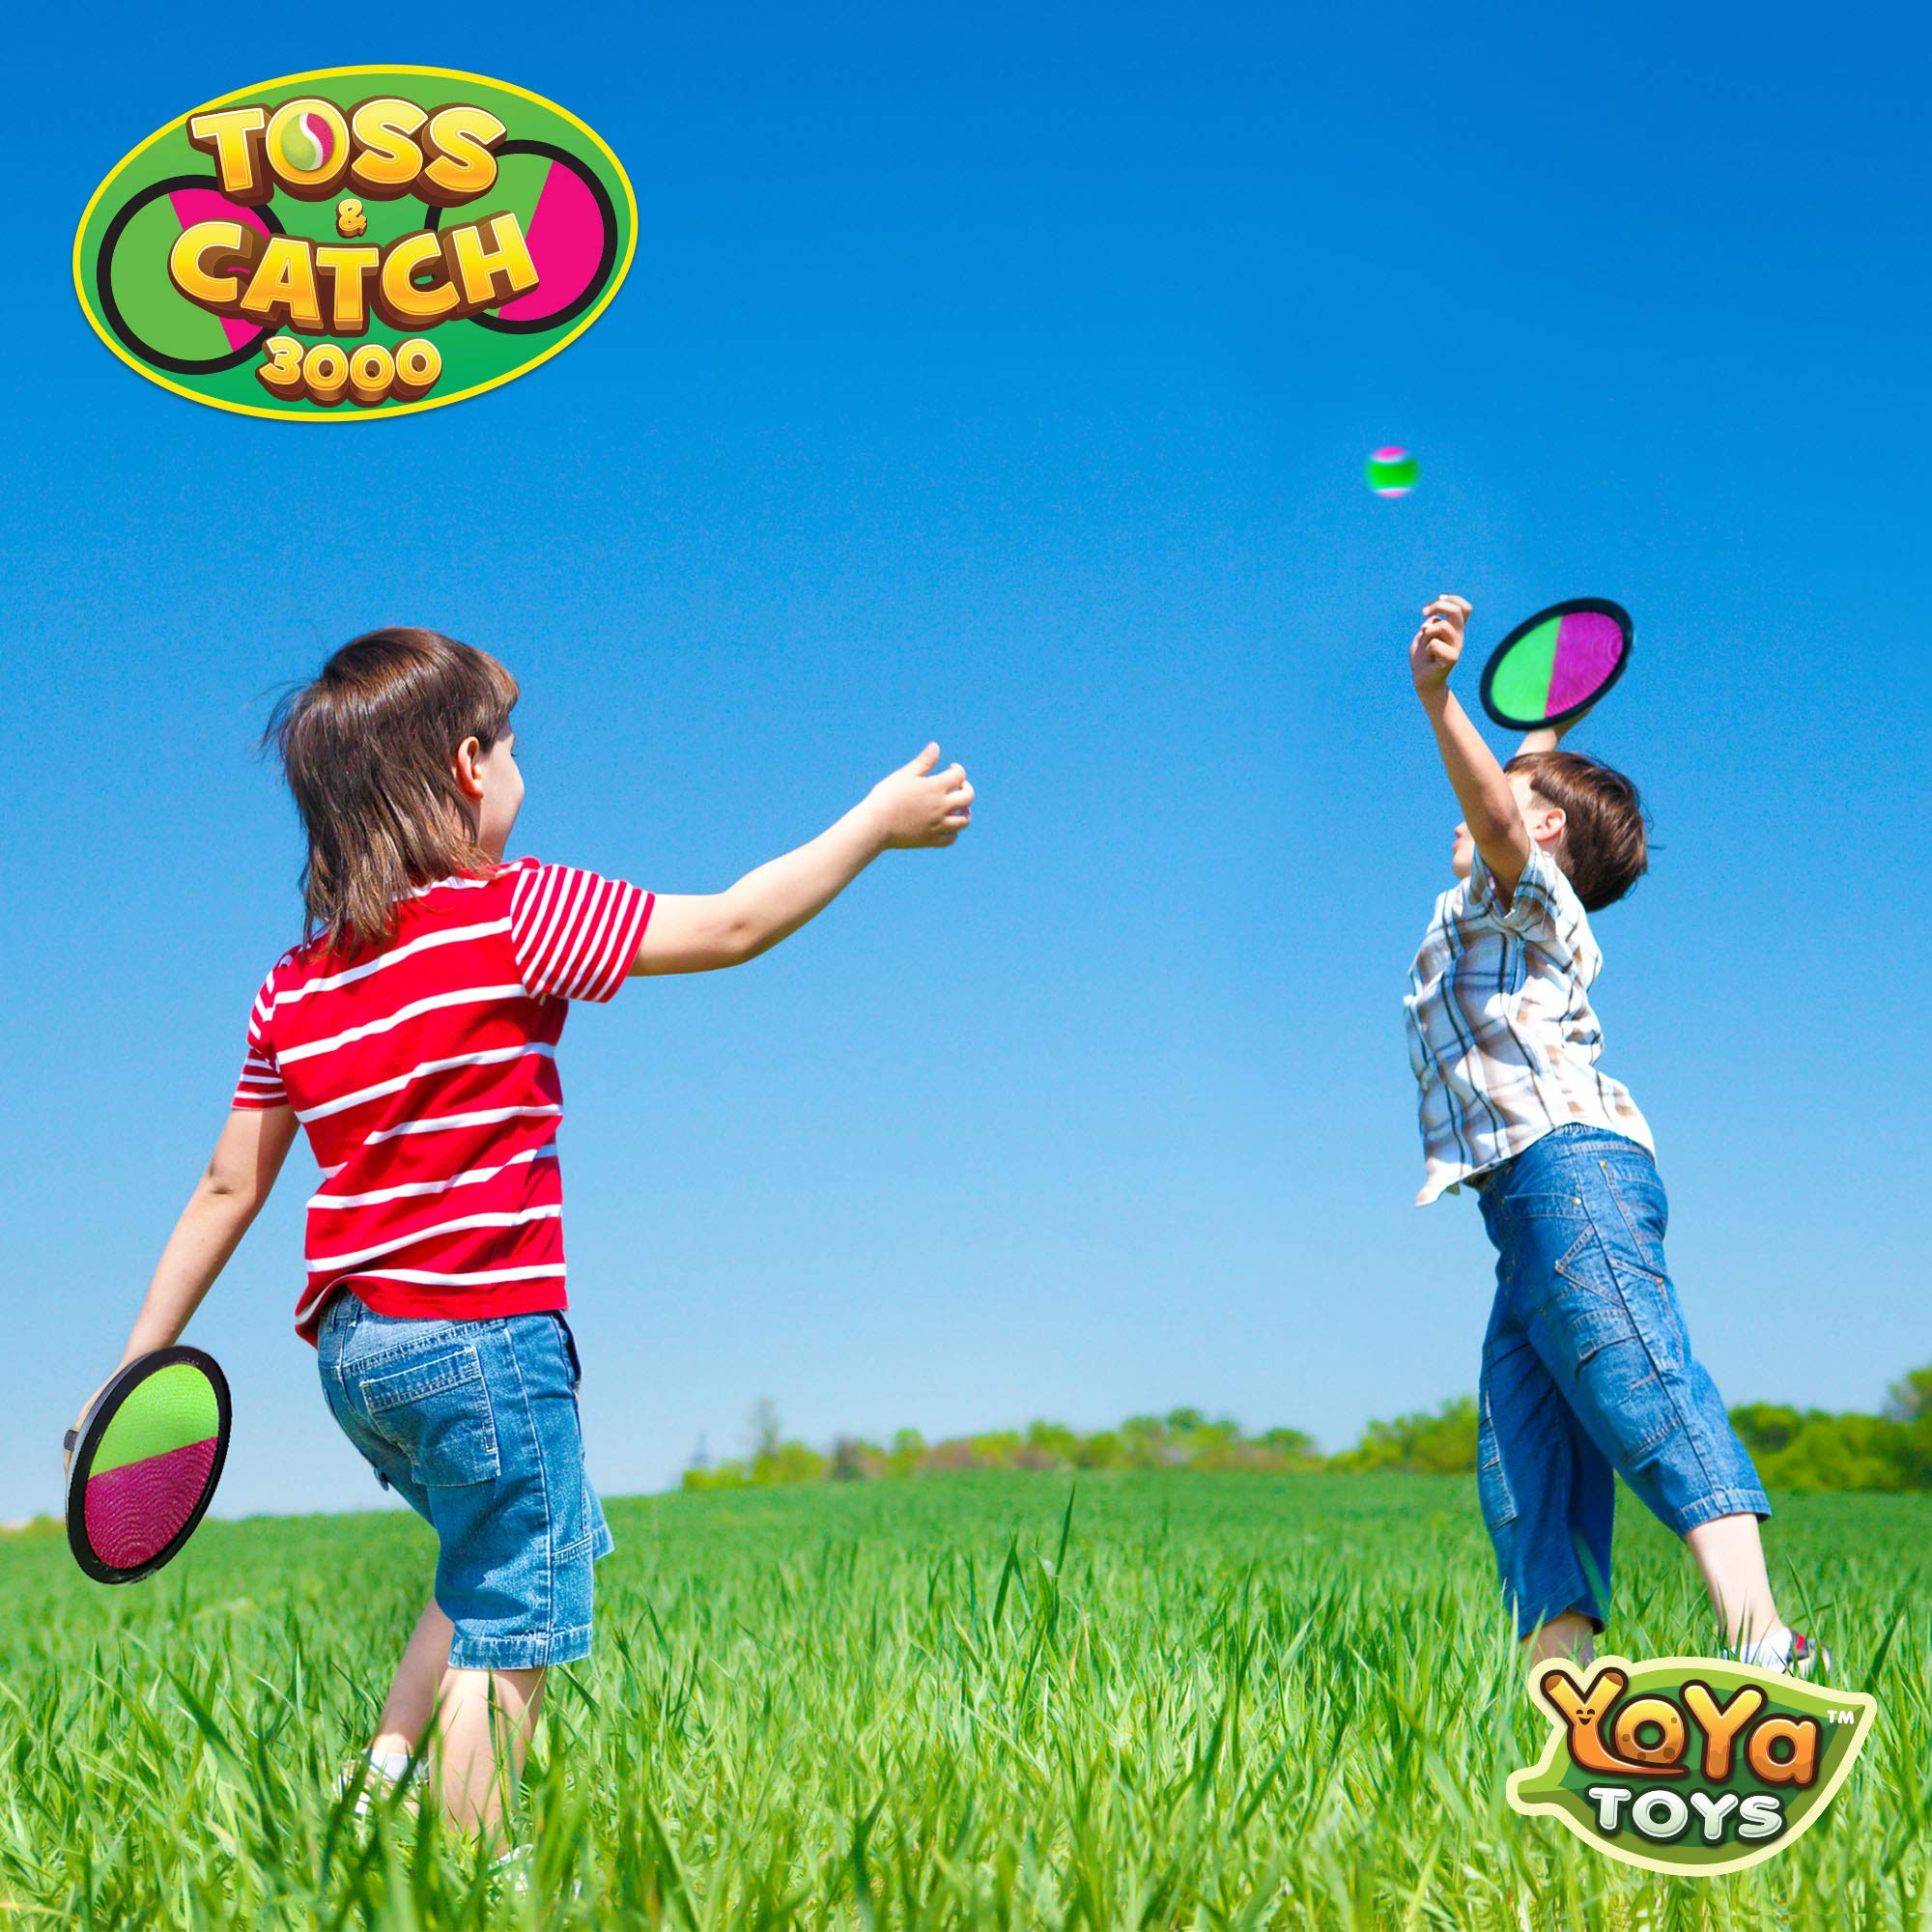 YoYa Toys Toss and Catch Ball Set Game - Outdoor Kids Activities - Summer Fun Toy for Backyard, Park, Camping - Ages 4-12, for Children and Family - 2 Catch Paddles, 2 Balls